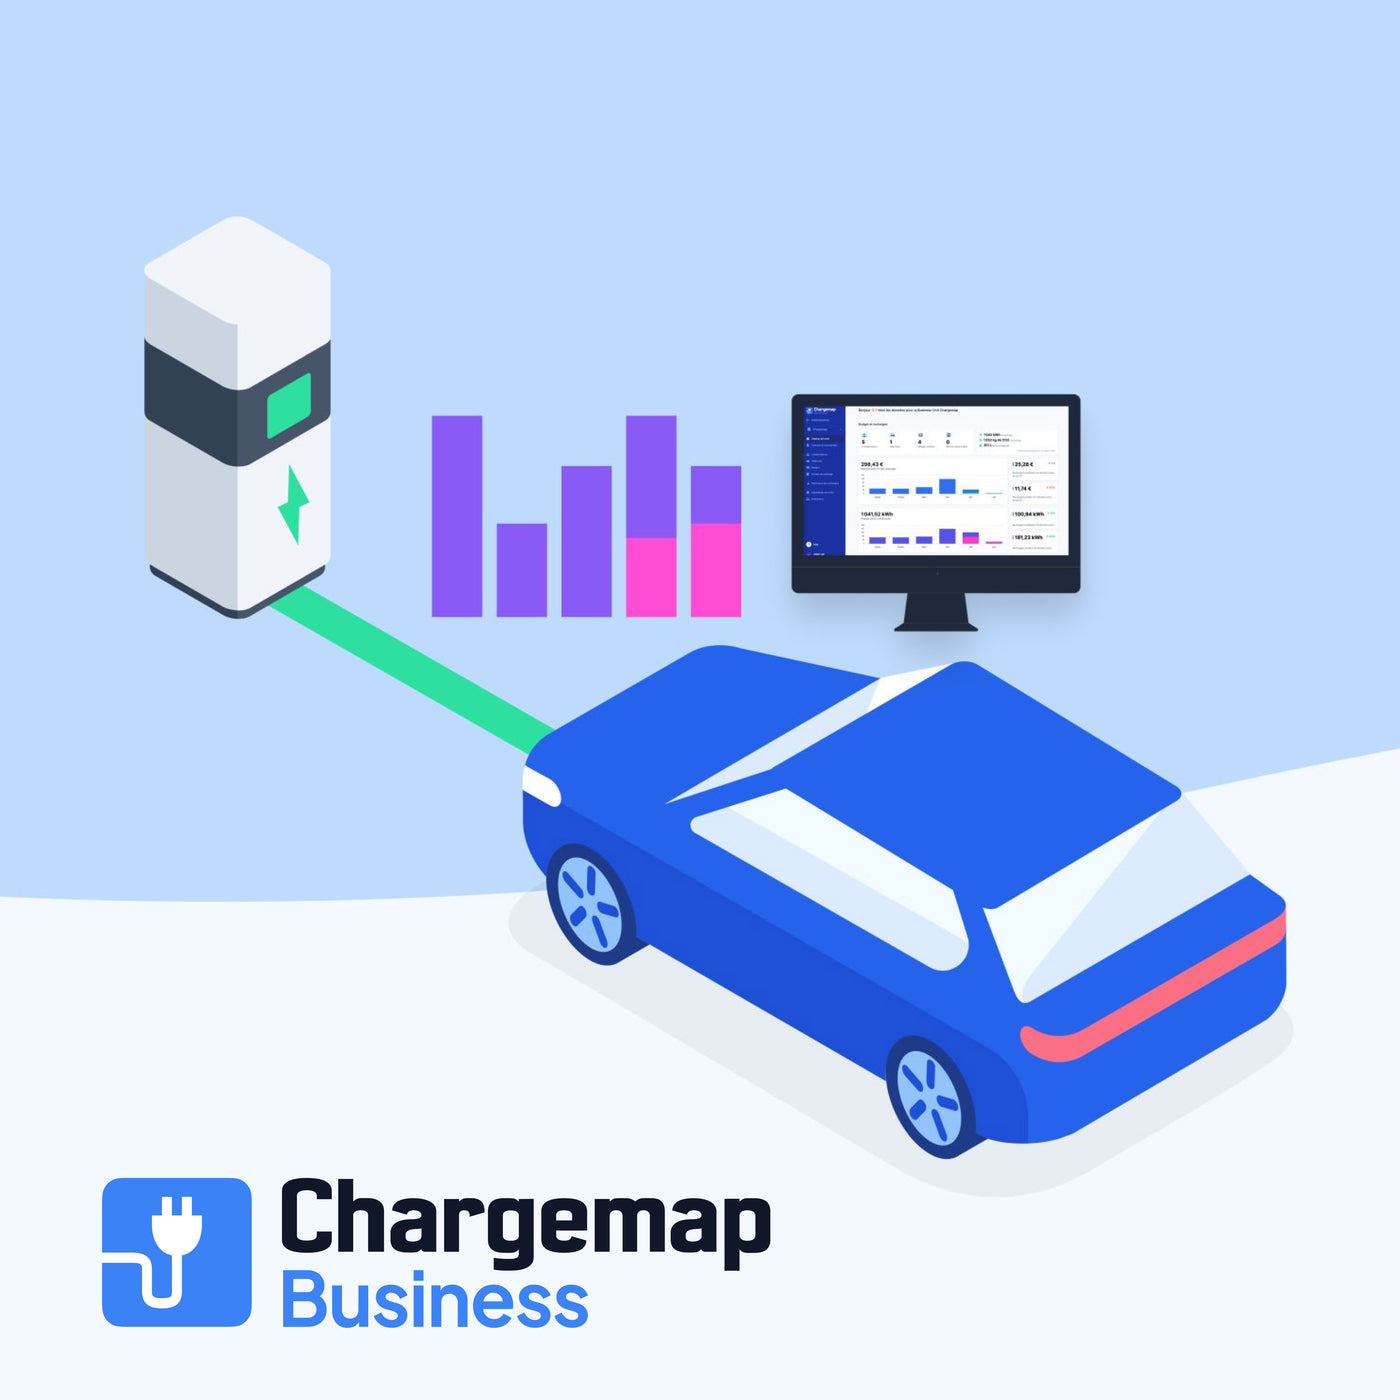 4G modem for supervised Chargemap Business charging stations